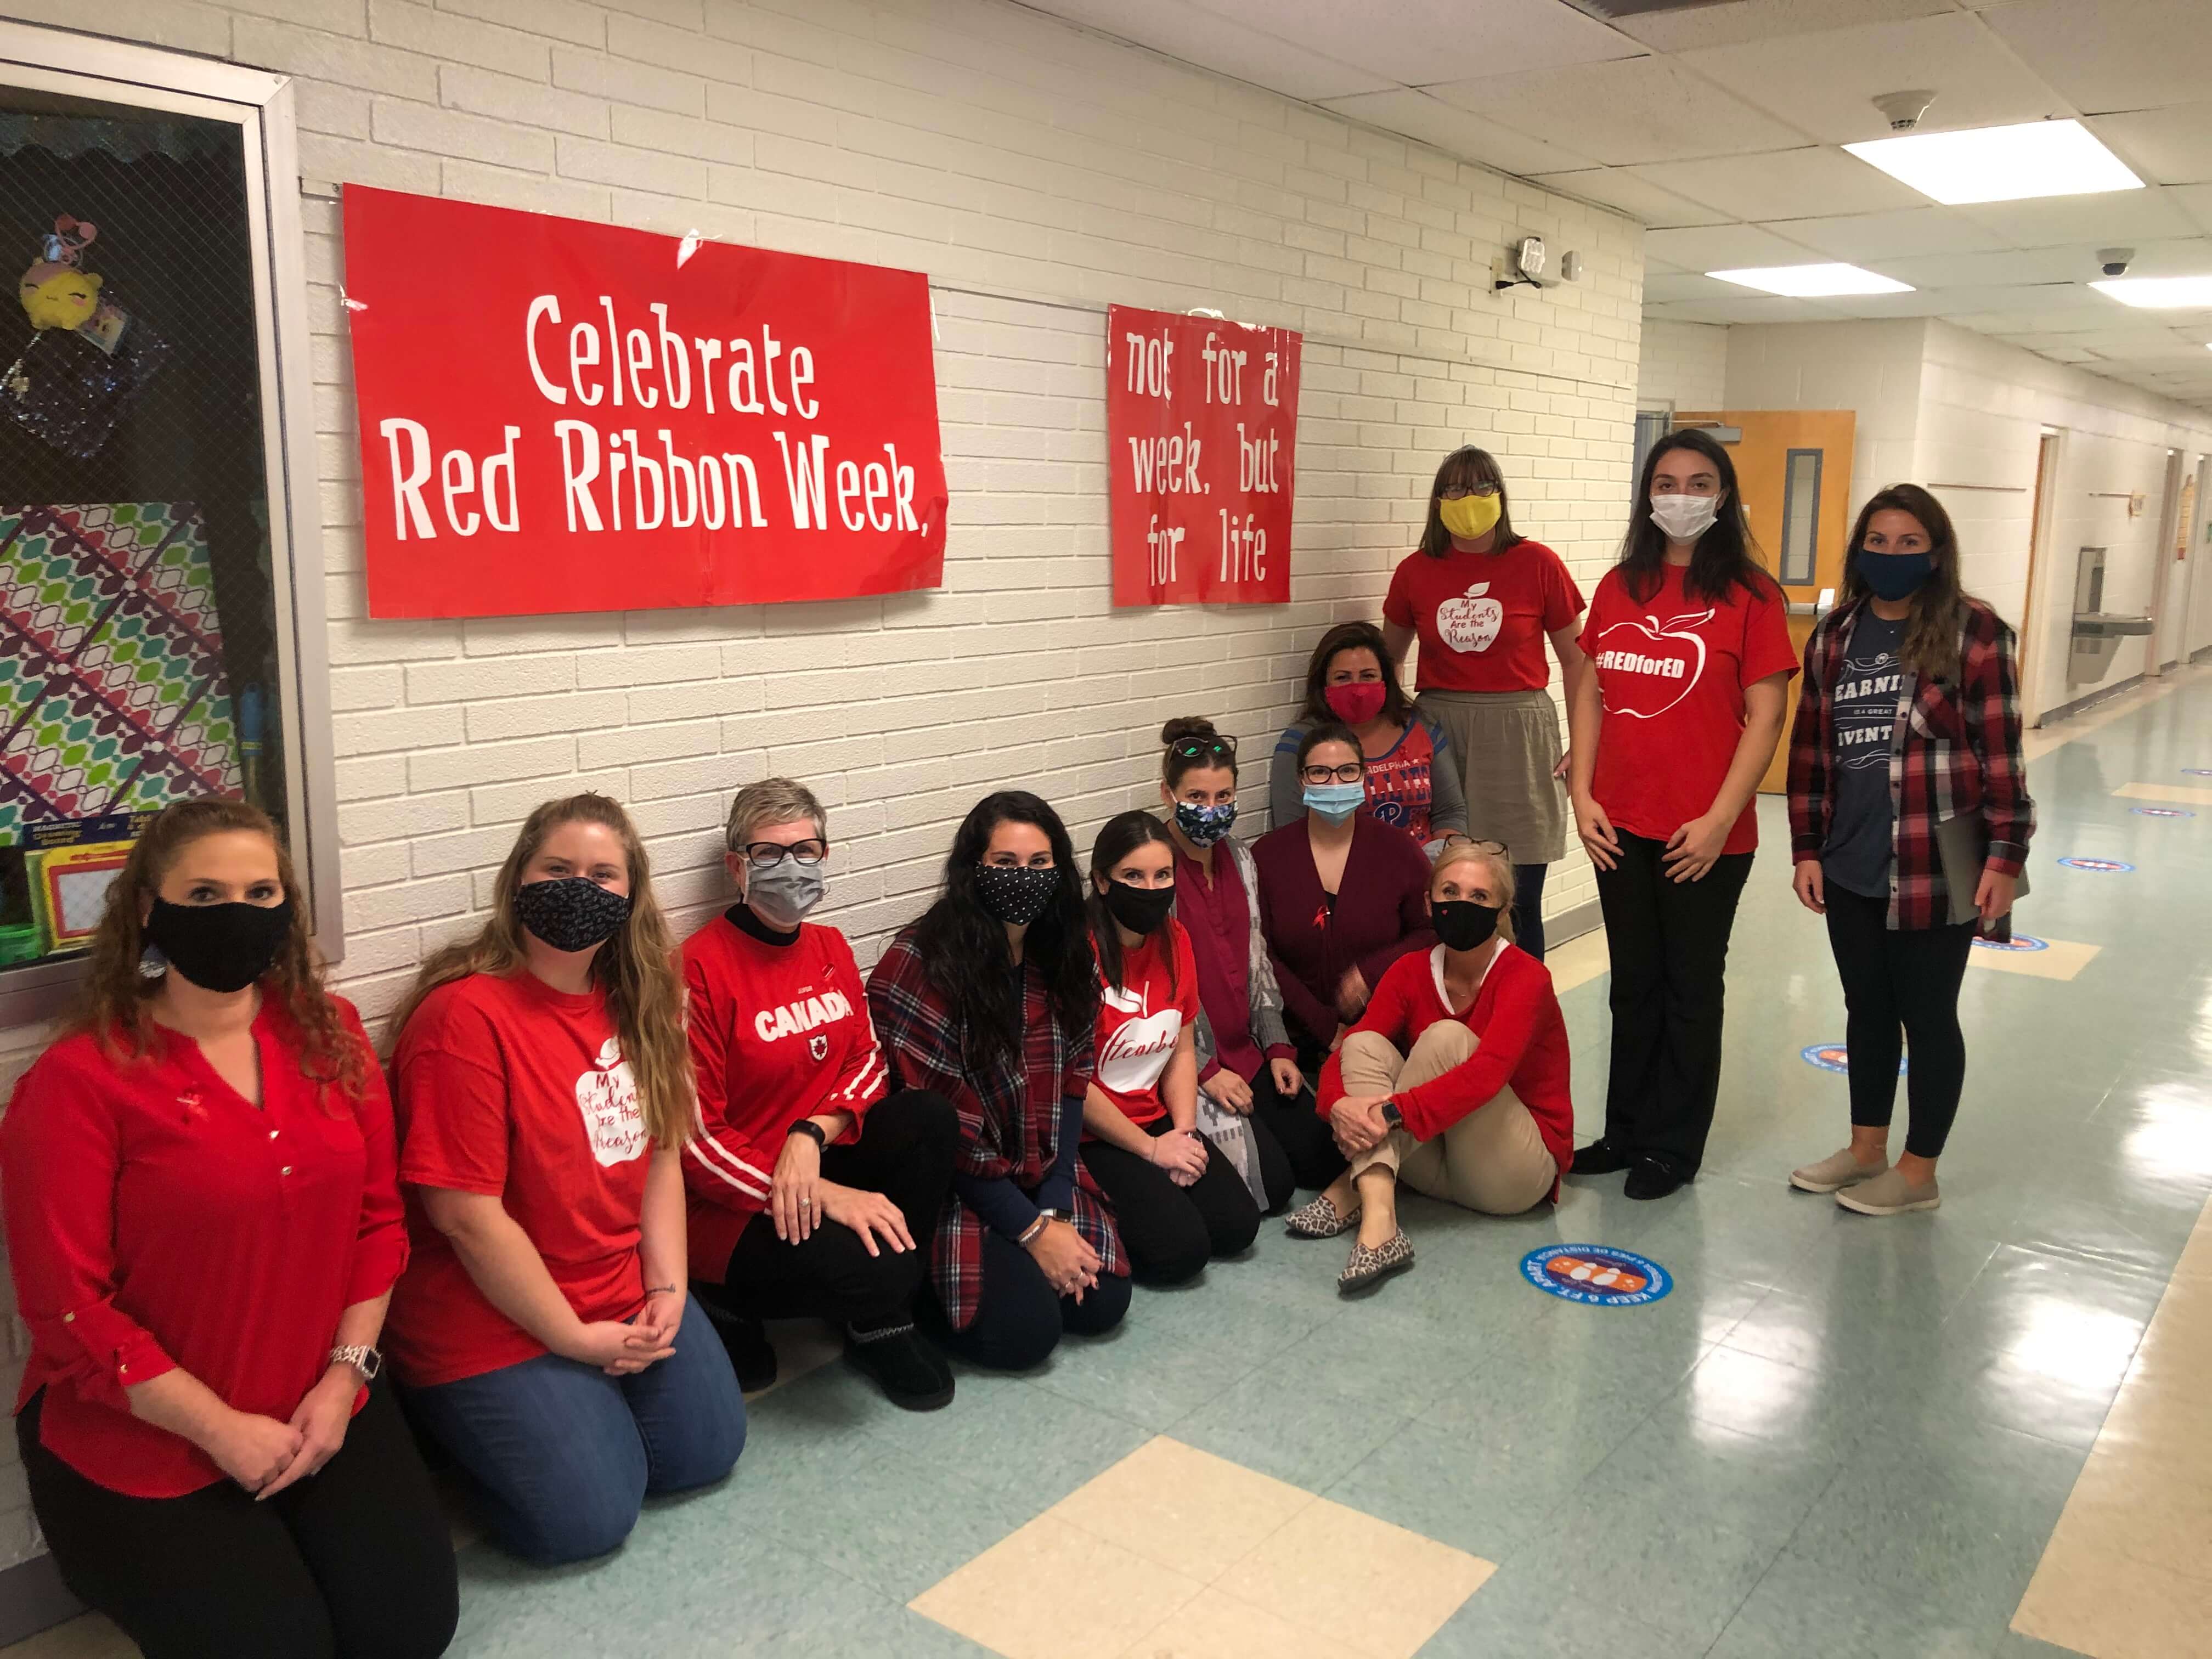 Woodbine Elementary School students and staff began a week of wearing red Oct. 26 for Red Ribbon Week